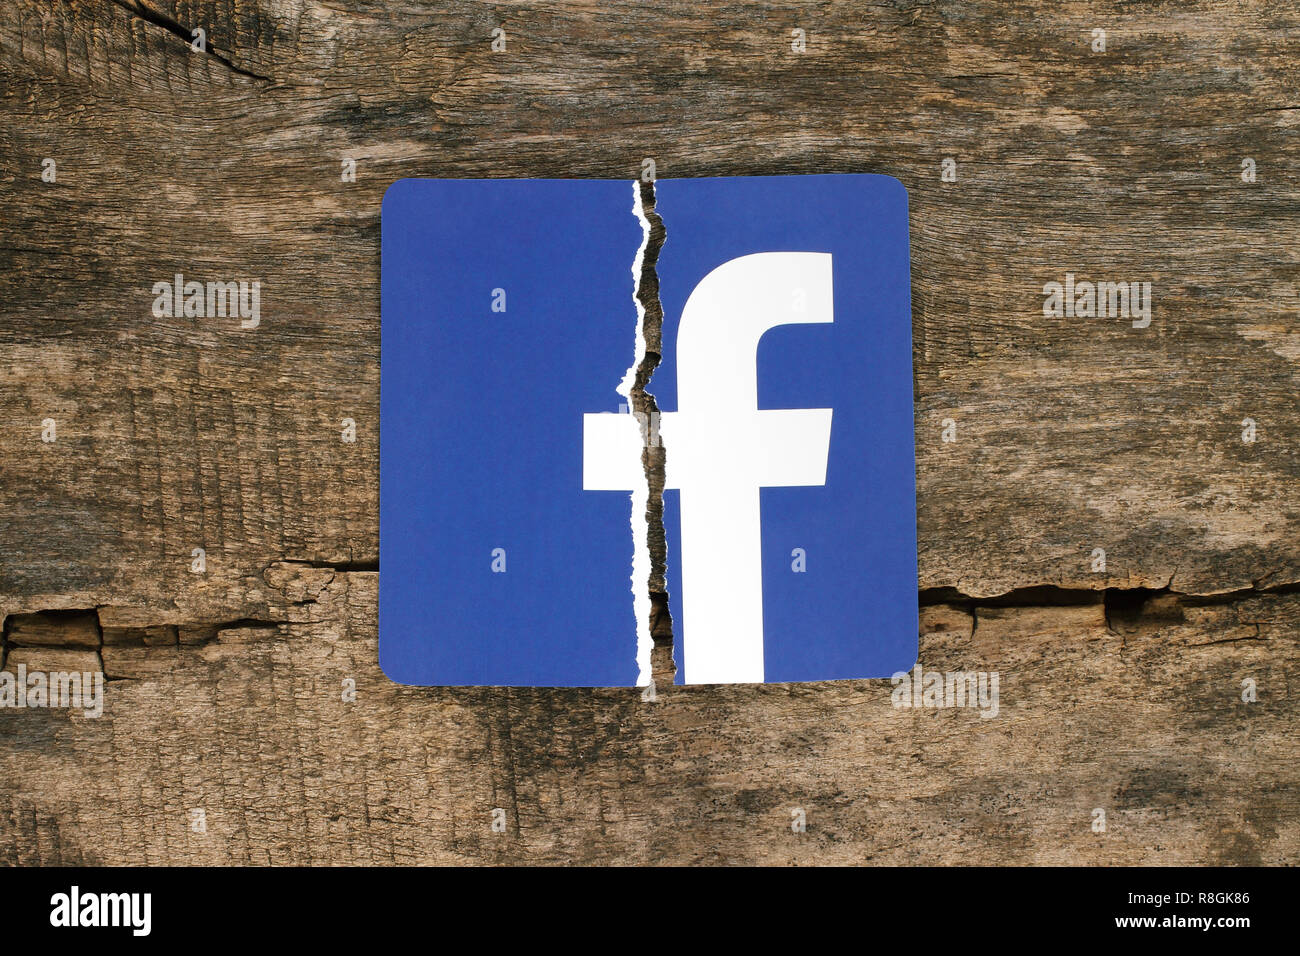 Kiev, Ukraine - November 07, 2018: Facebook icon printed on paper, torn and put on old wooden background. Facebook security and privacy issues concept Stock Photo